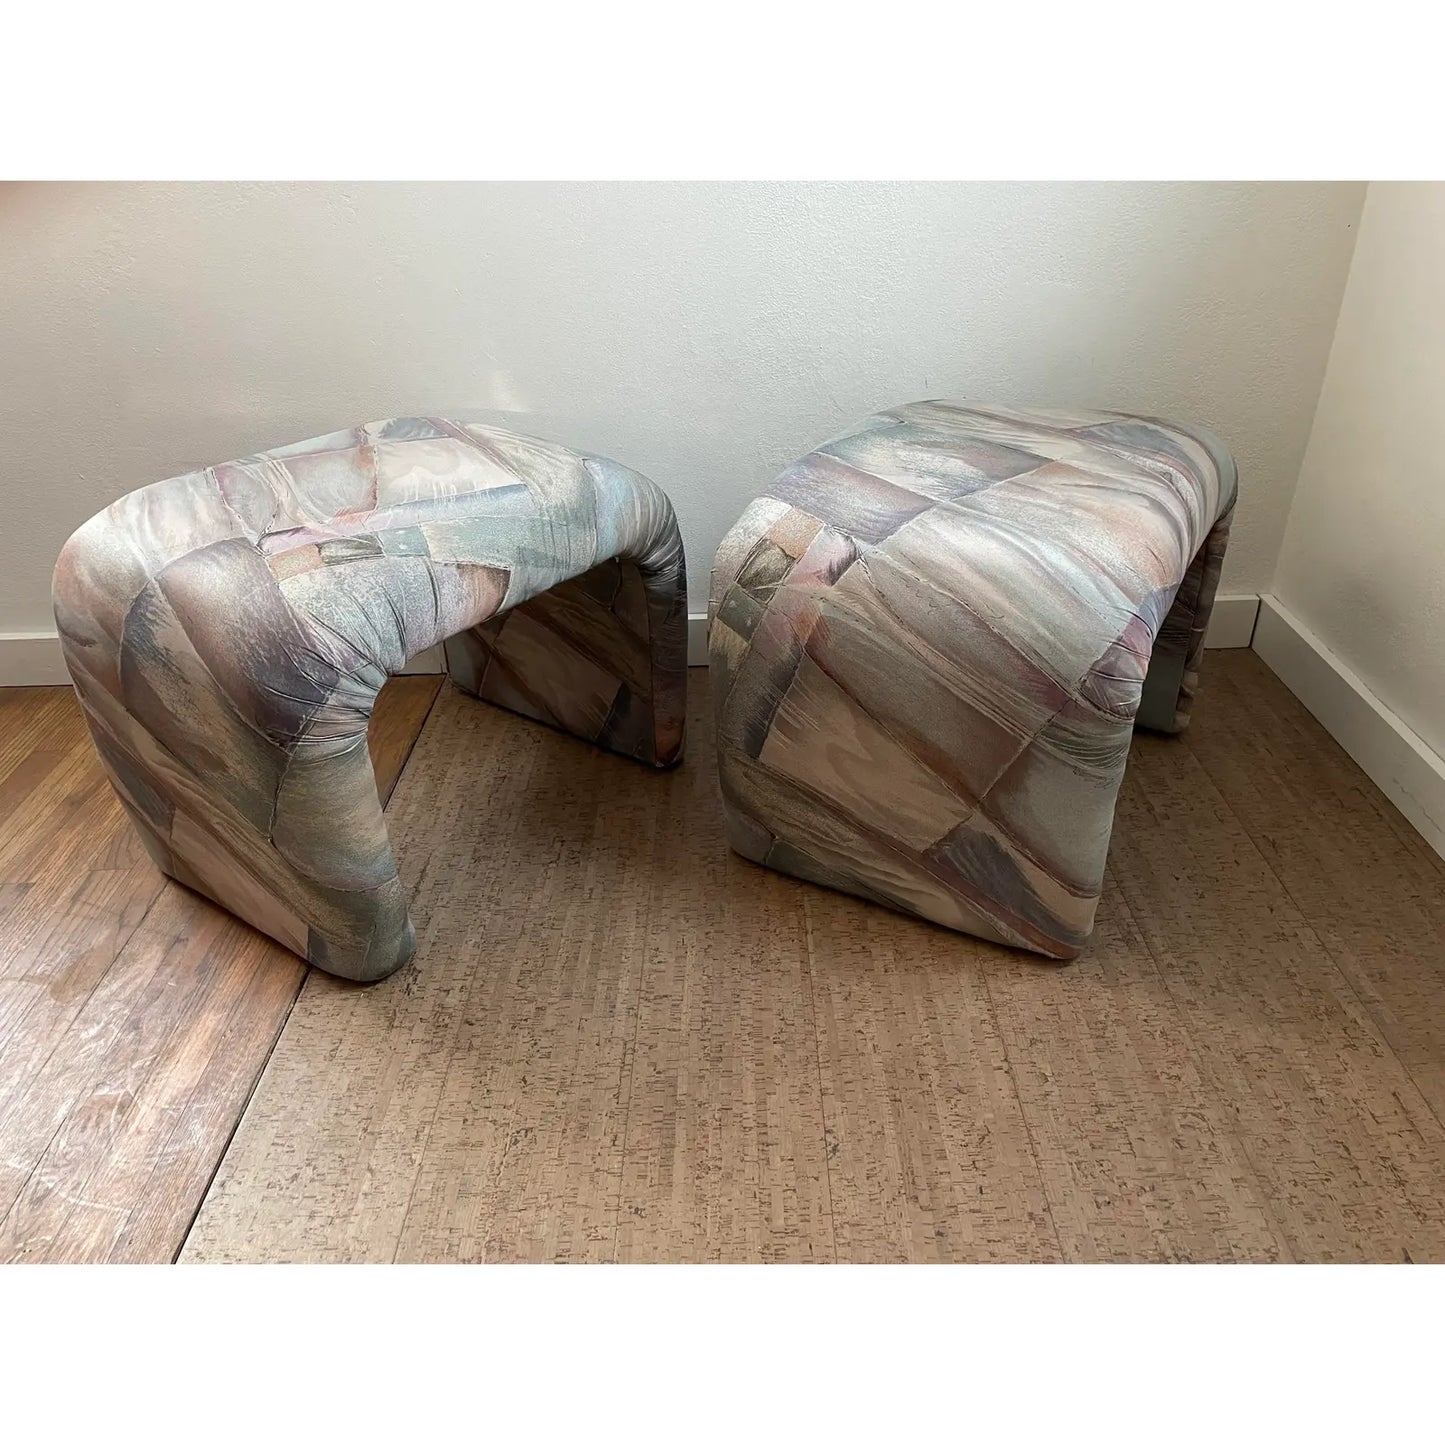 1980s Hollywood Regency Style Waterfall Stools - a Pair